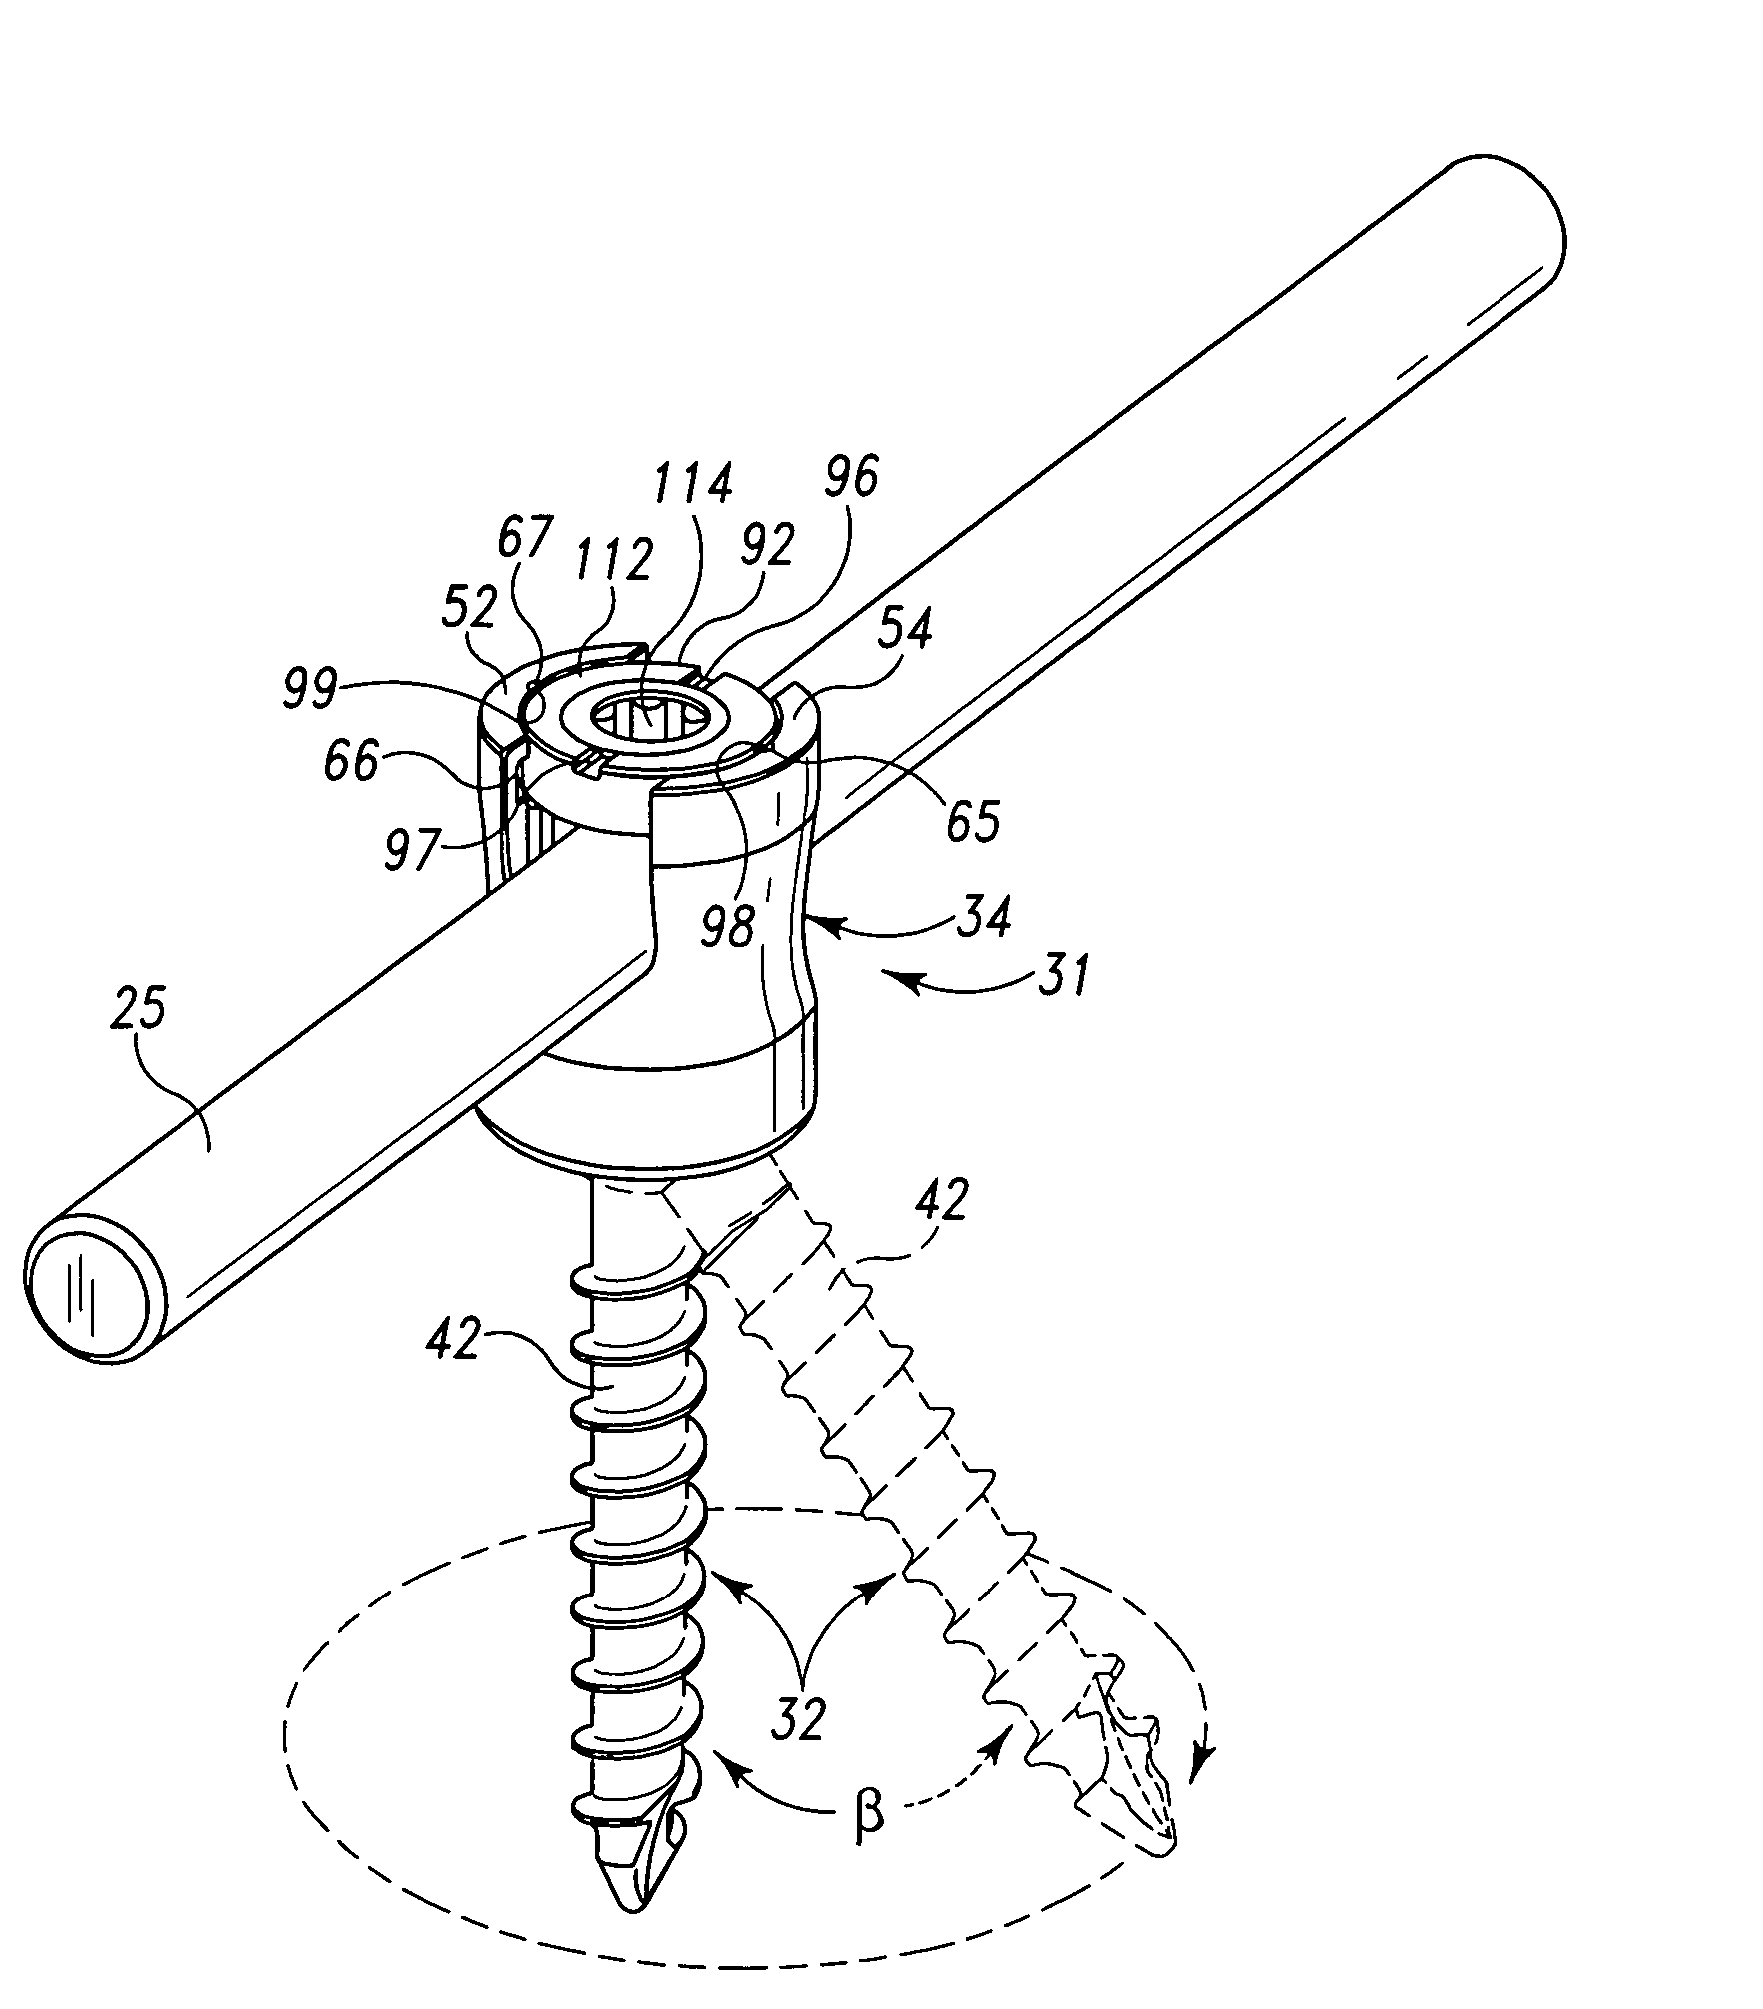 Pedicle screw constructs for spine fixation systems